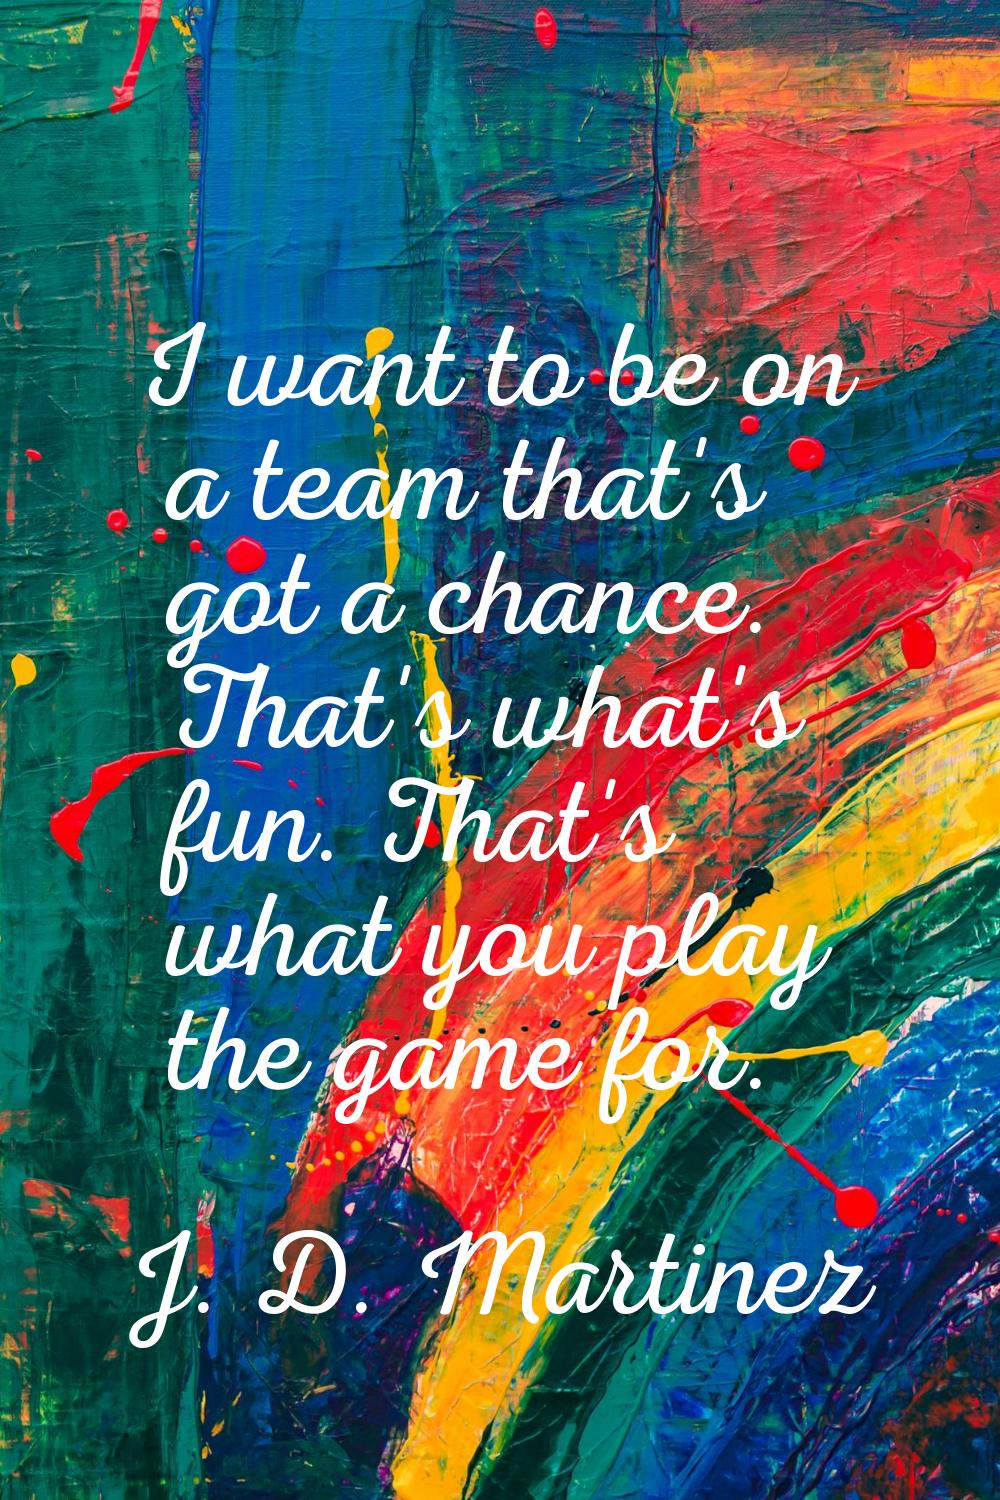 I want to be on a team that's got a chance. That's what's fun. That's what you play the game for.